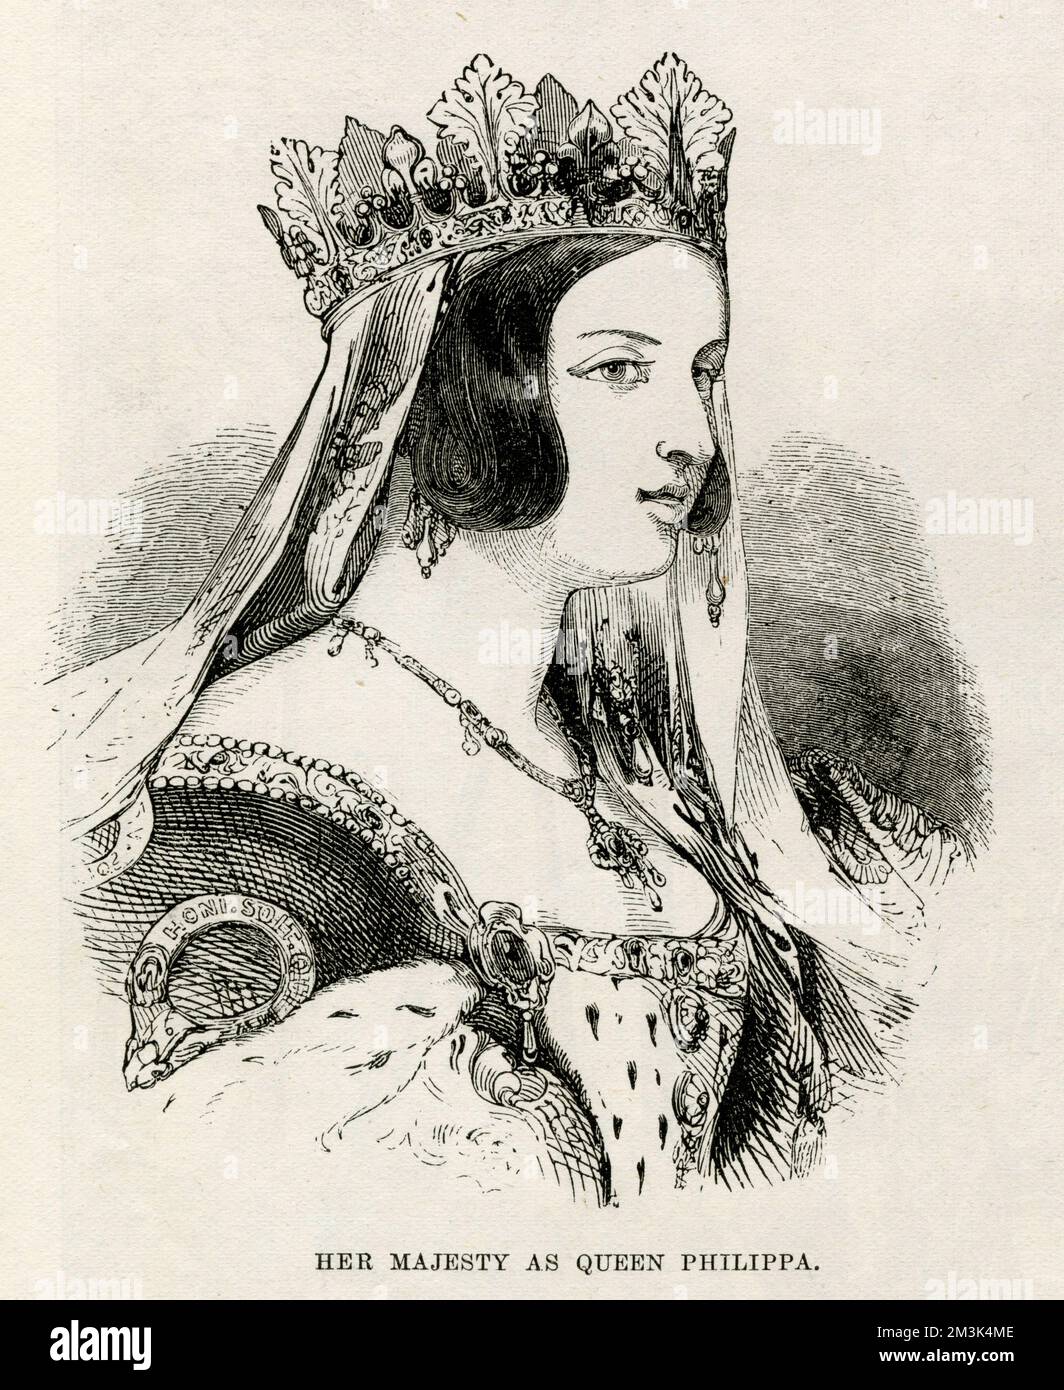 Queen Victoria in fancy dress for the 'Queen's historical costume ball' held on the 12th May 1842.  The Queen chose to dress as Philippa, Queen of Edward III. Her splendid attire included lining of miniver fur, which she alone wore at her ball.     Date: 12 May 1842 Stock Photo